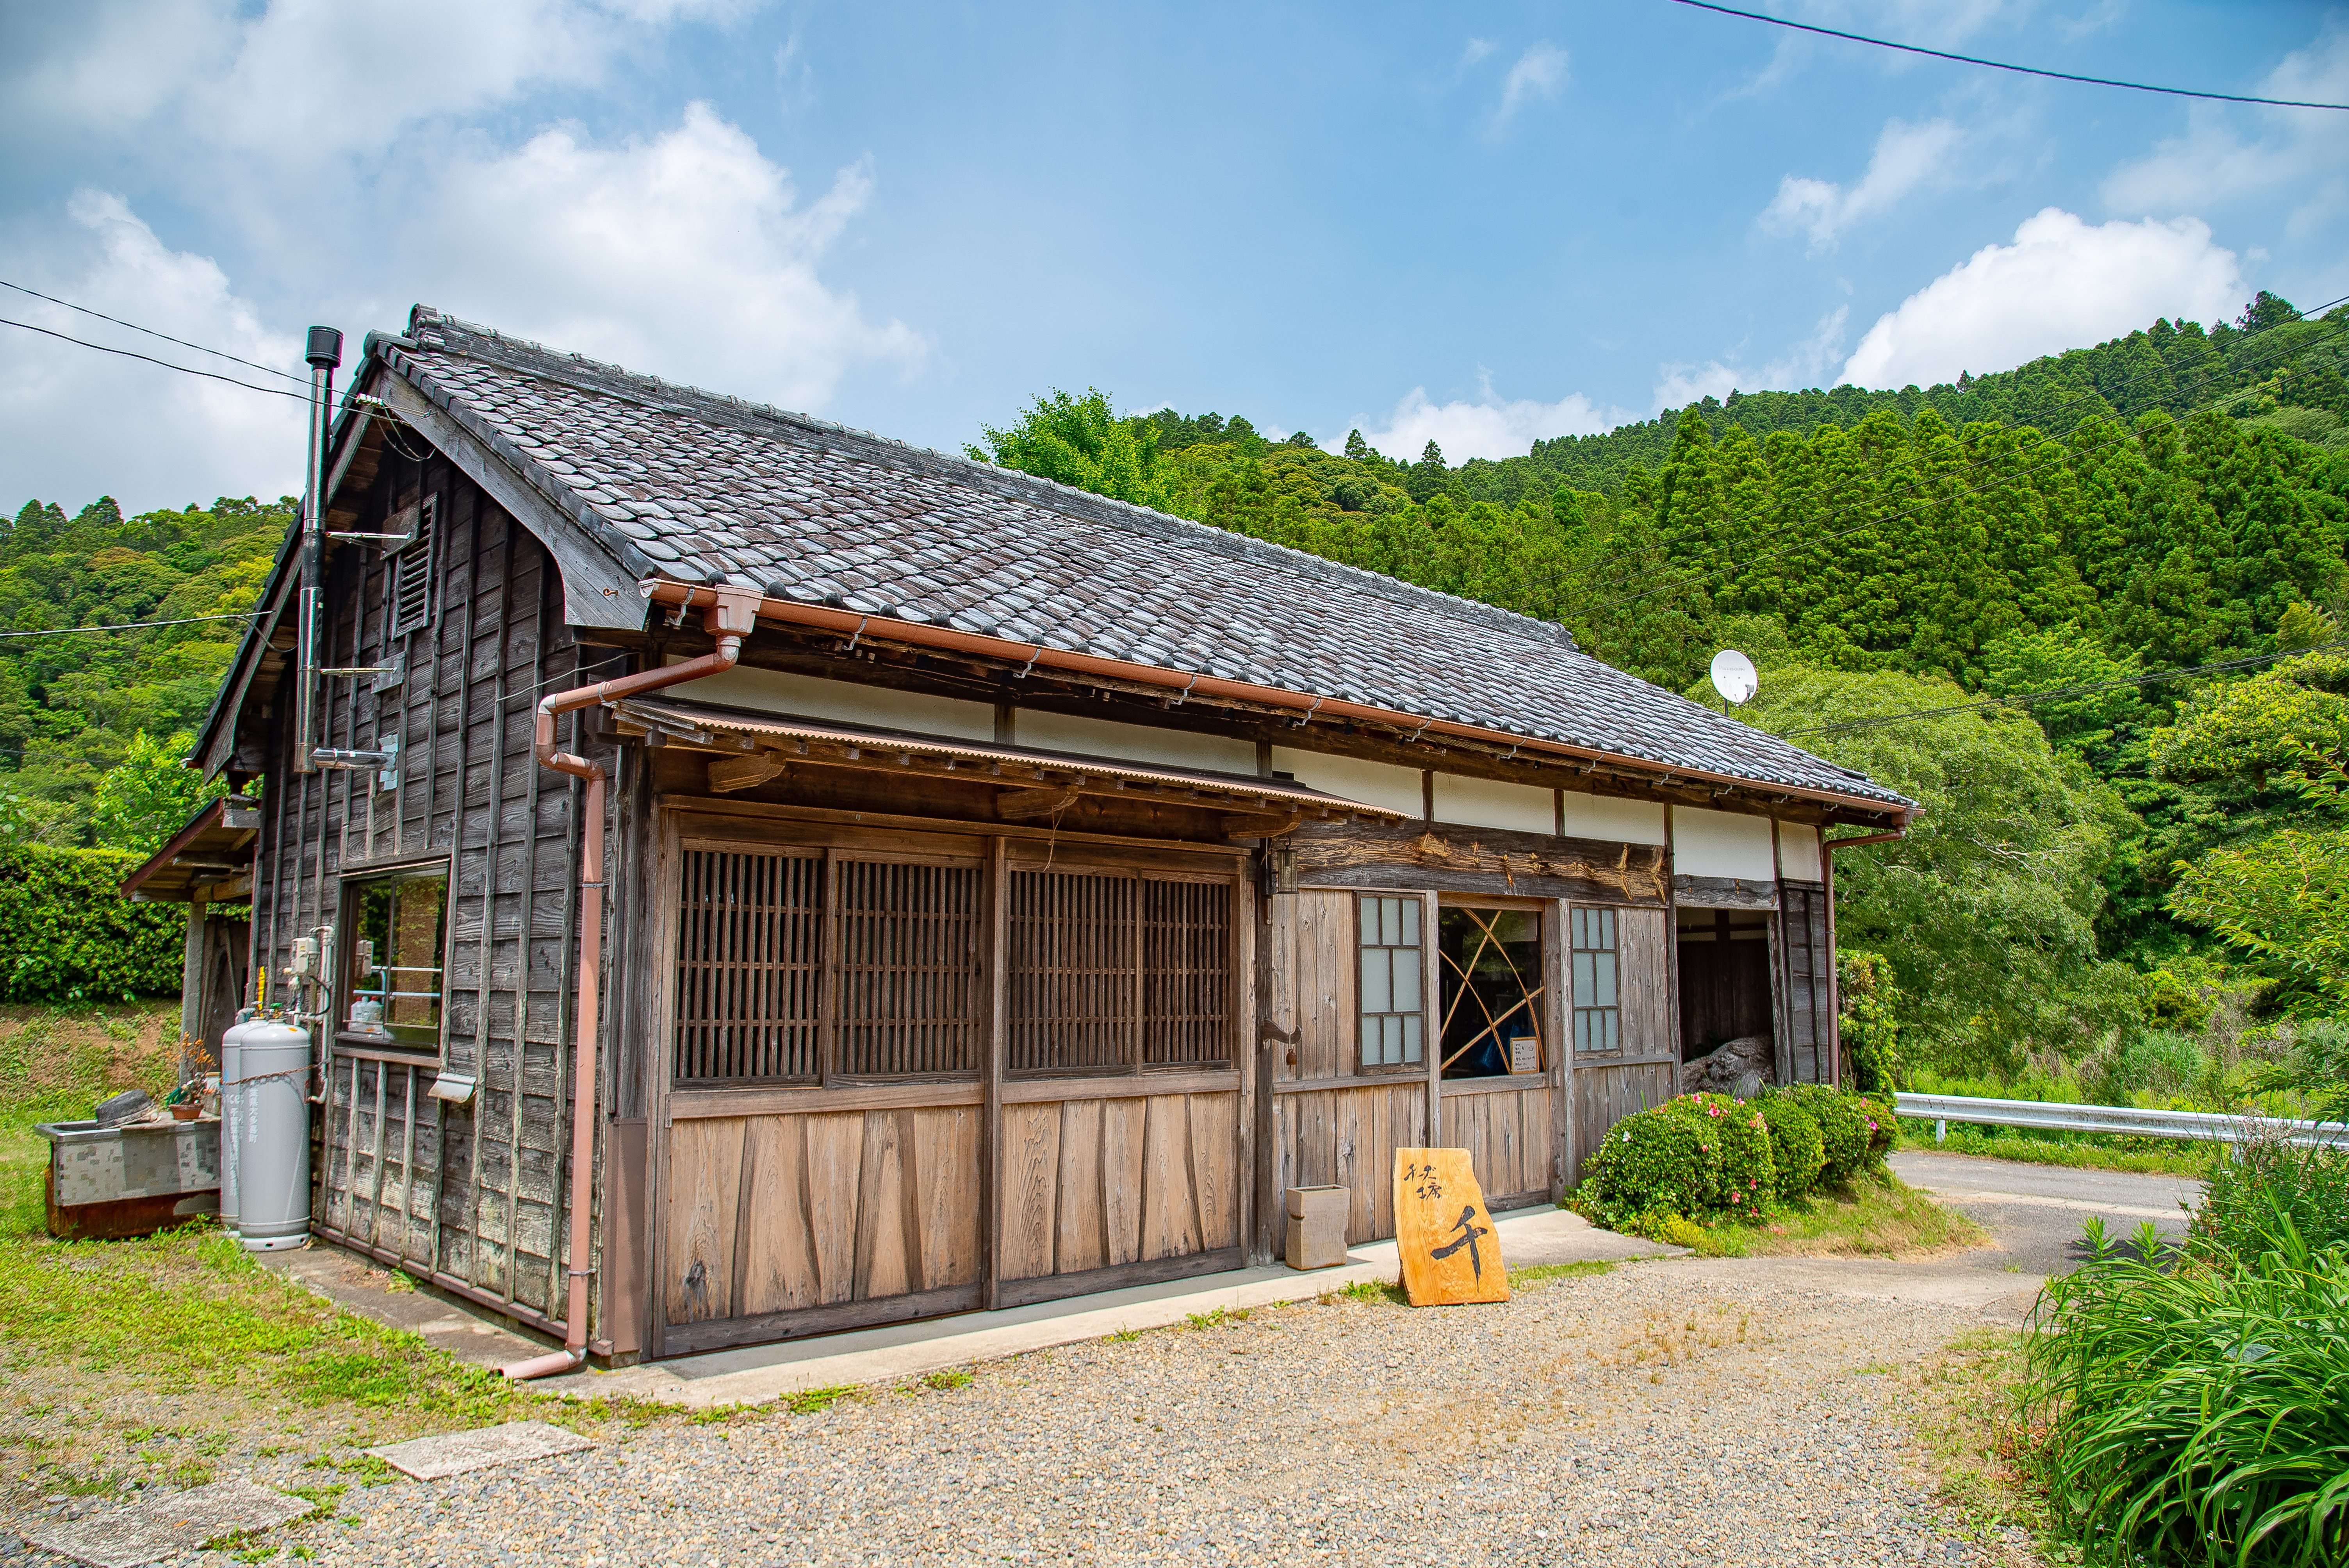 Shibata's cheesery is a traditional Japanese building.